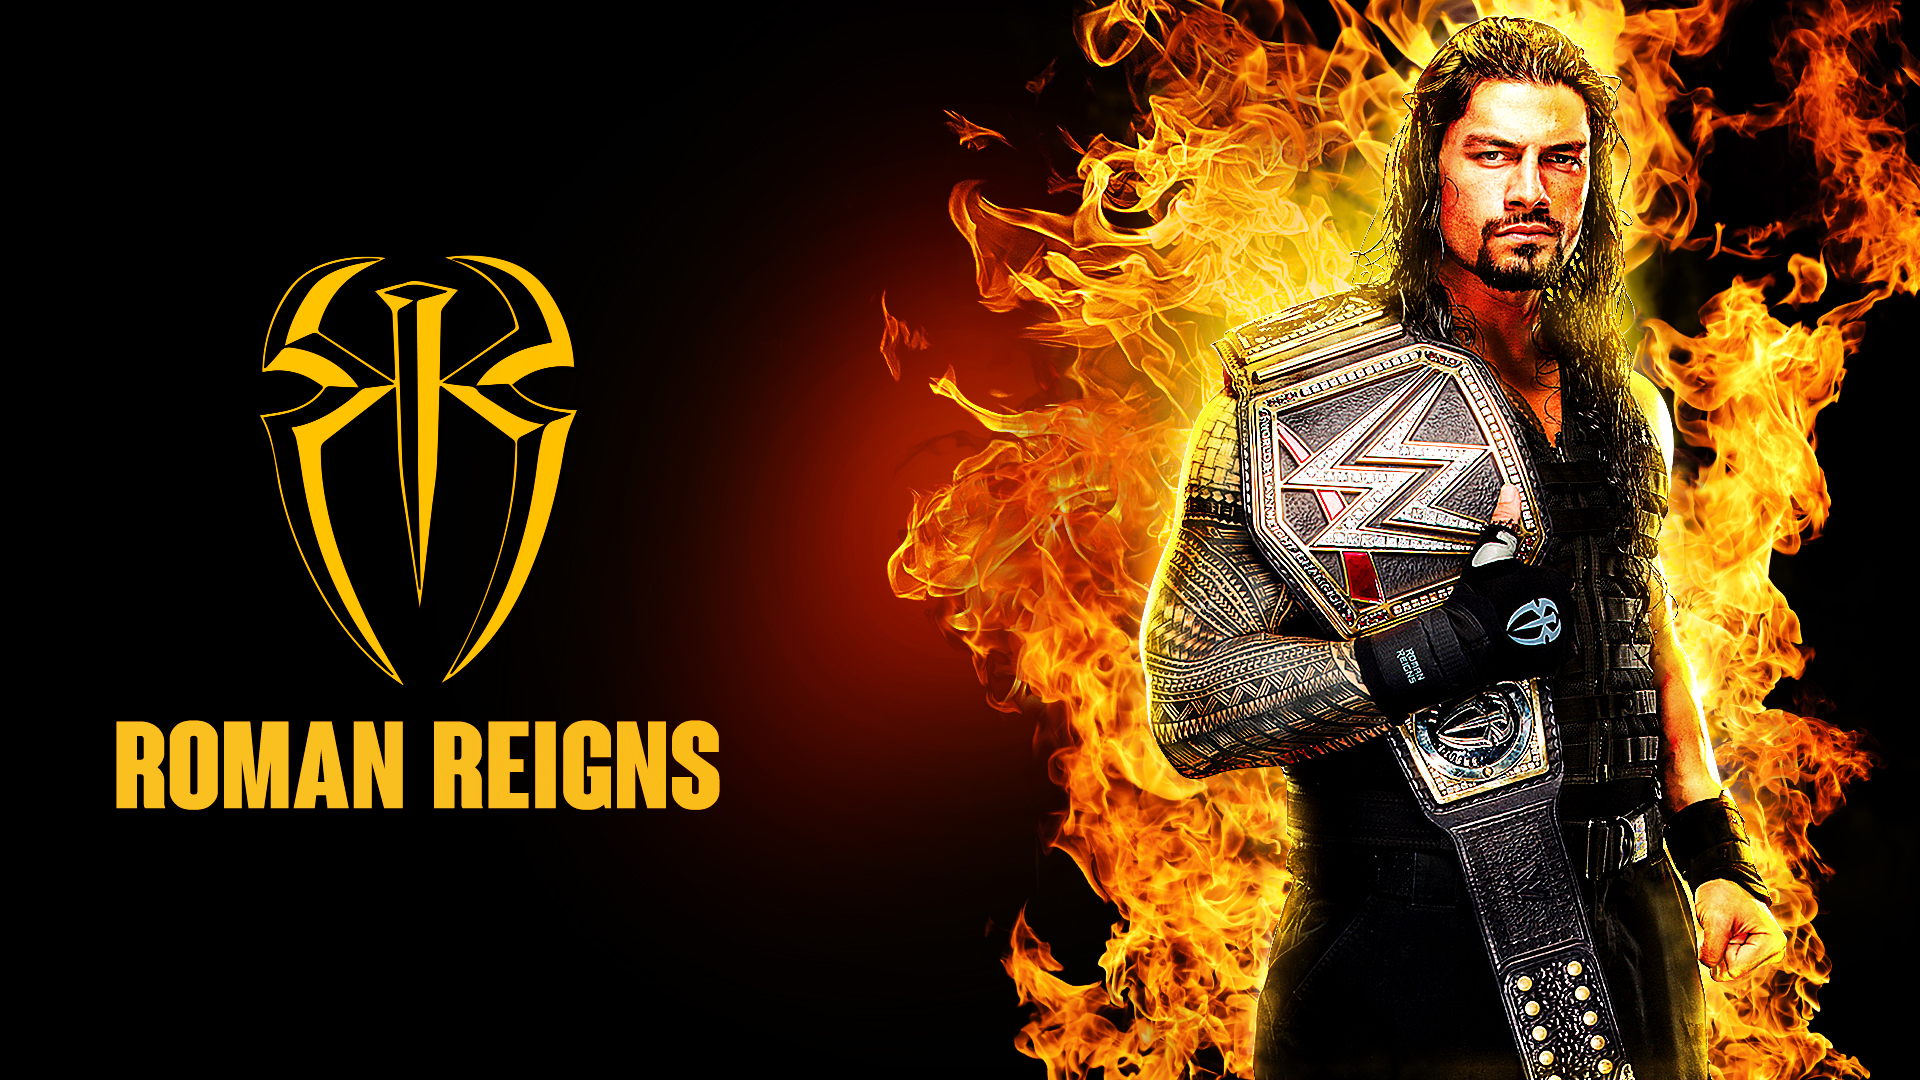 The Rock And Roman Reigns Wallpaper On